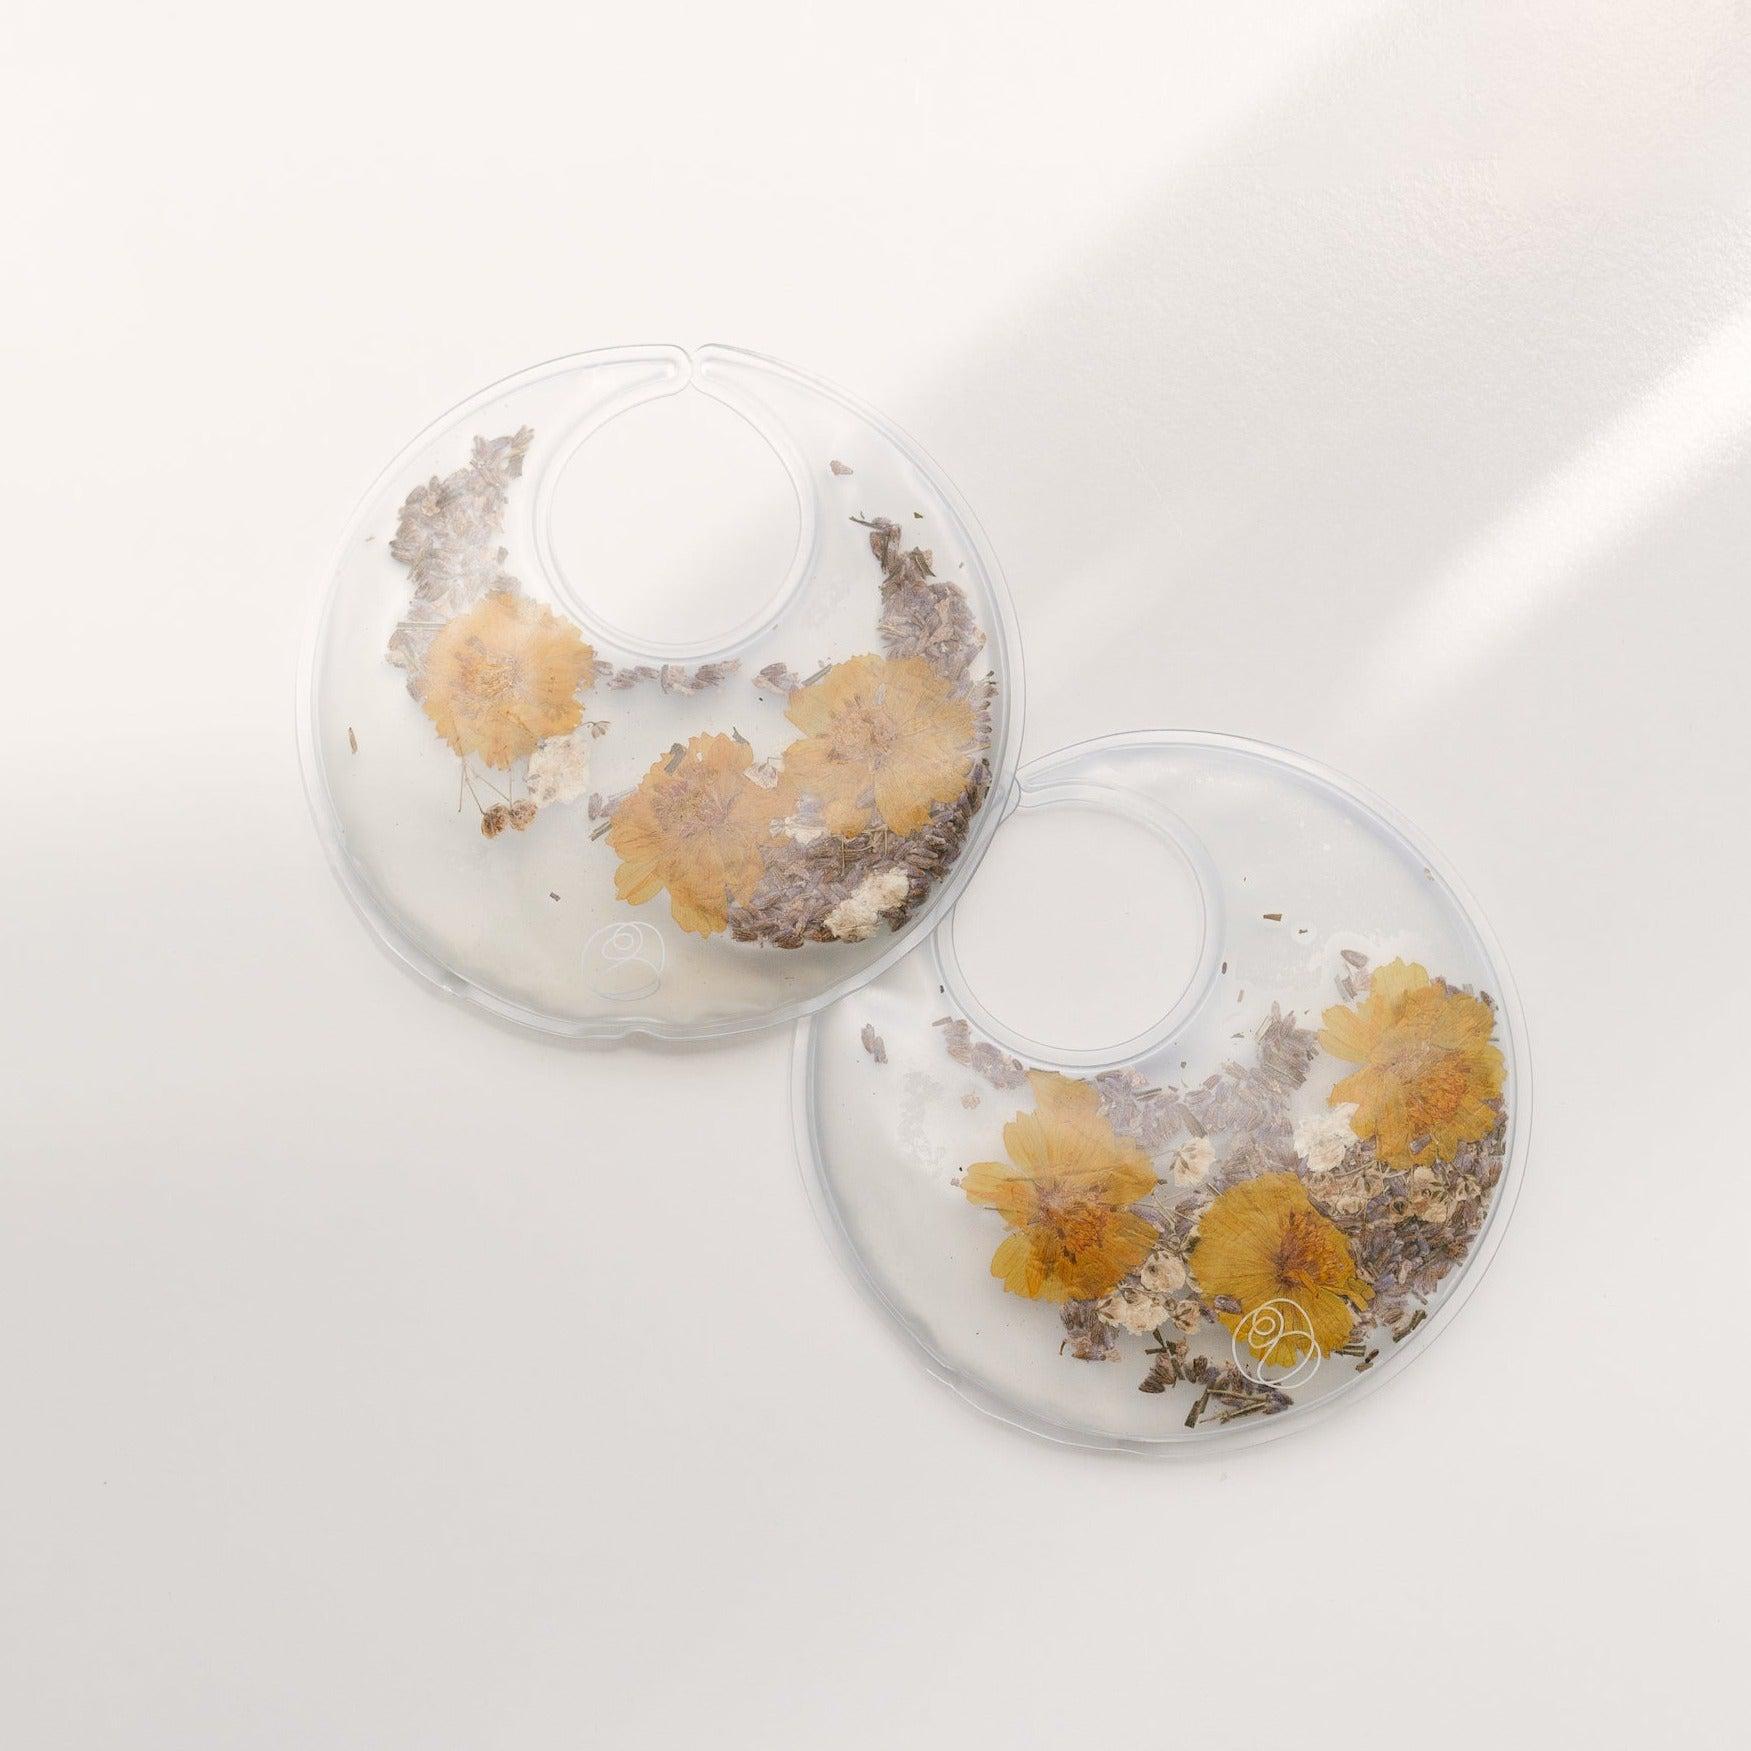 A pair of Bare Mum Breast Care Kit earrings for the mother's recovery after giving birth.